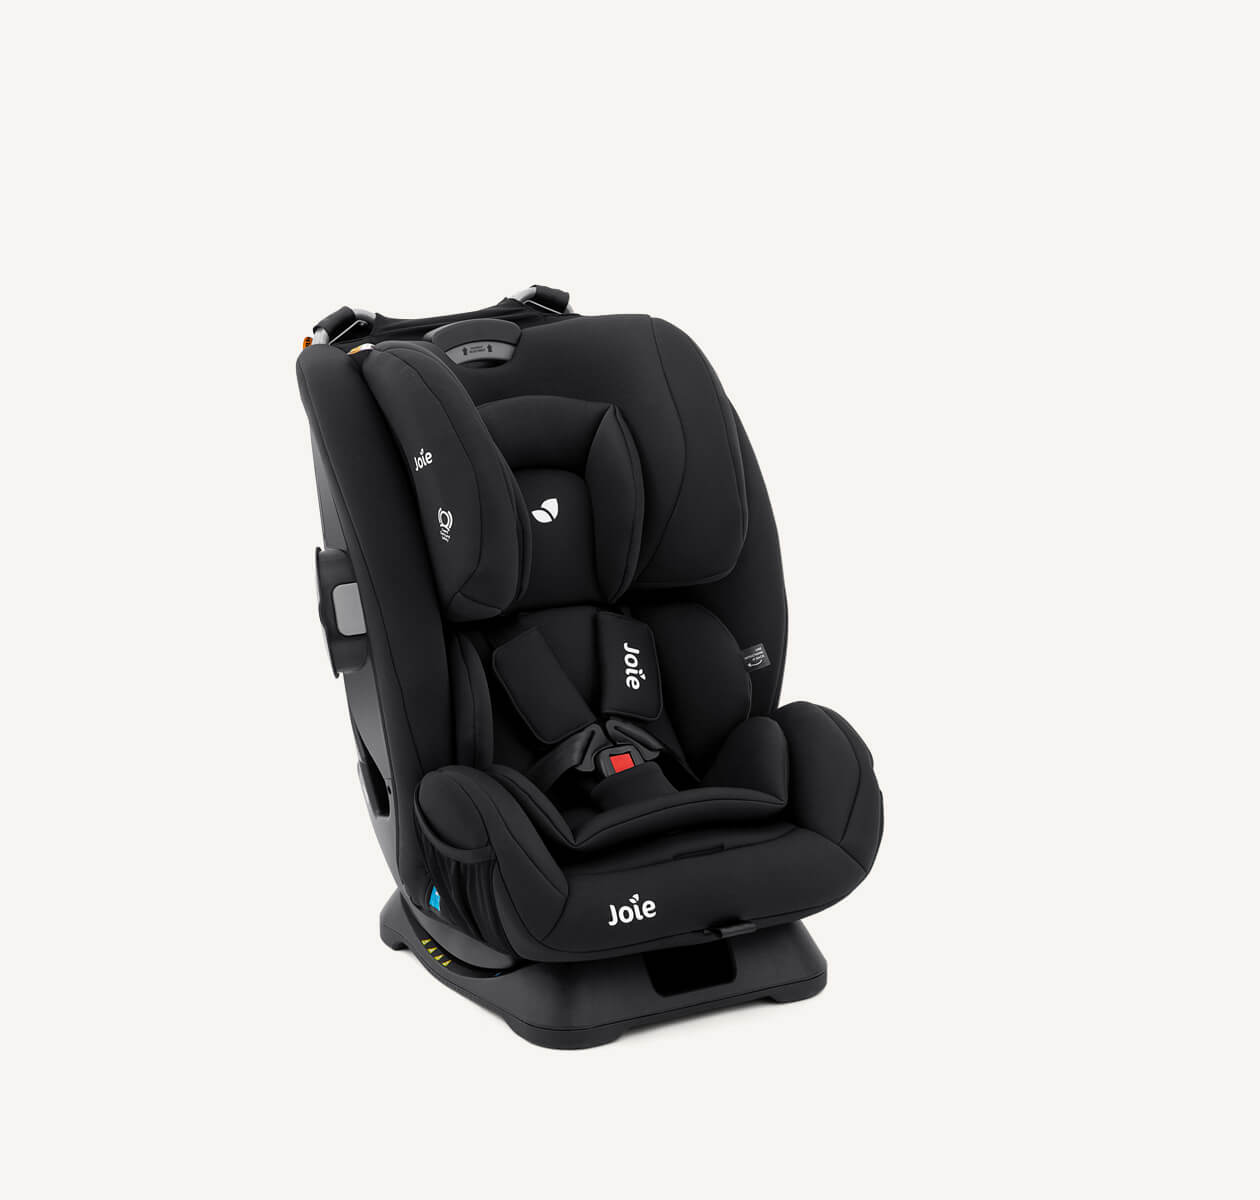  Joie armour car seat in black from a right angle with the headrest fully lowered.